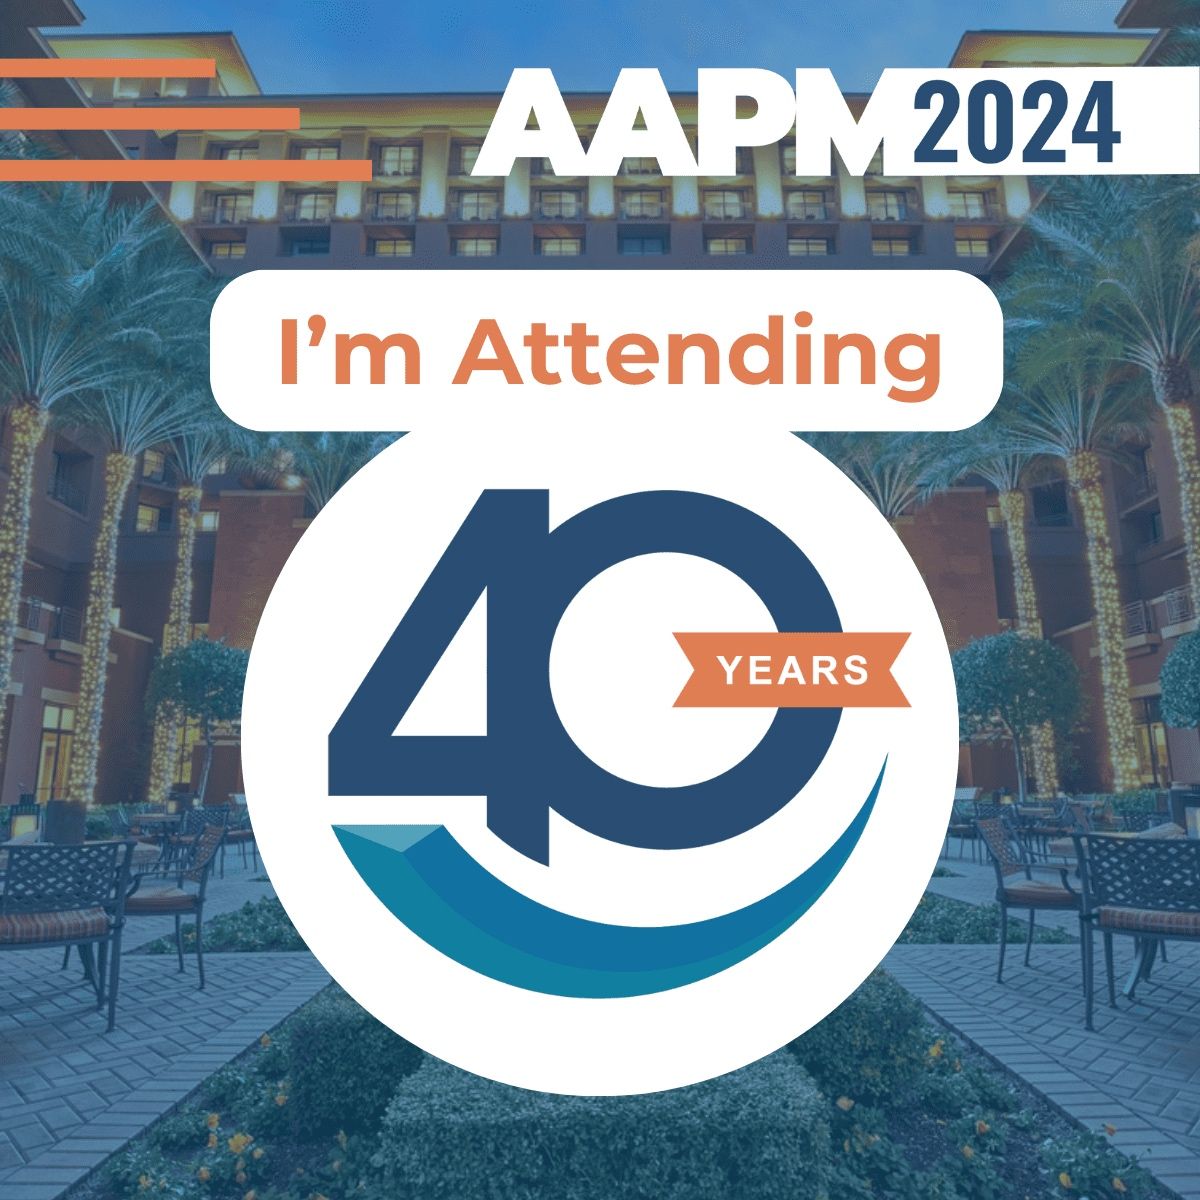 Hikma will be attending the American Academy of Pain Medicine (AAPM) 2024 Annual Meeting from March 7-10 in Scottsdale, AZ. Stop by our booth to meet the team and learn more about how we can help you meet the needs of your providers and patients. #AAPM2024